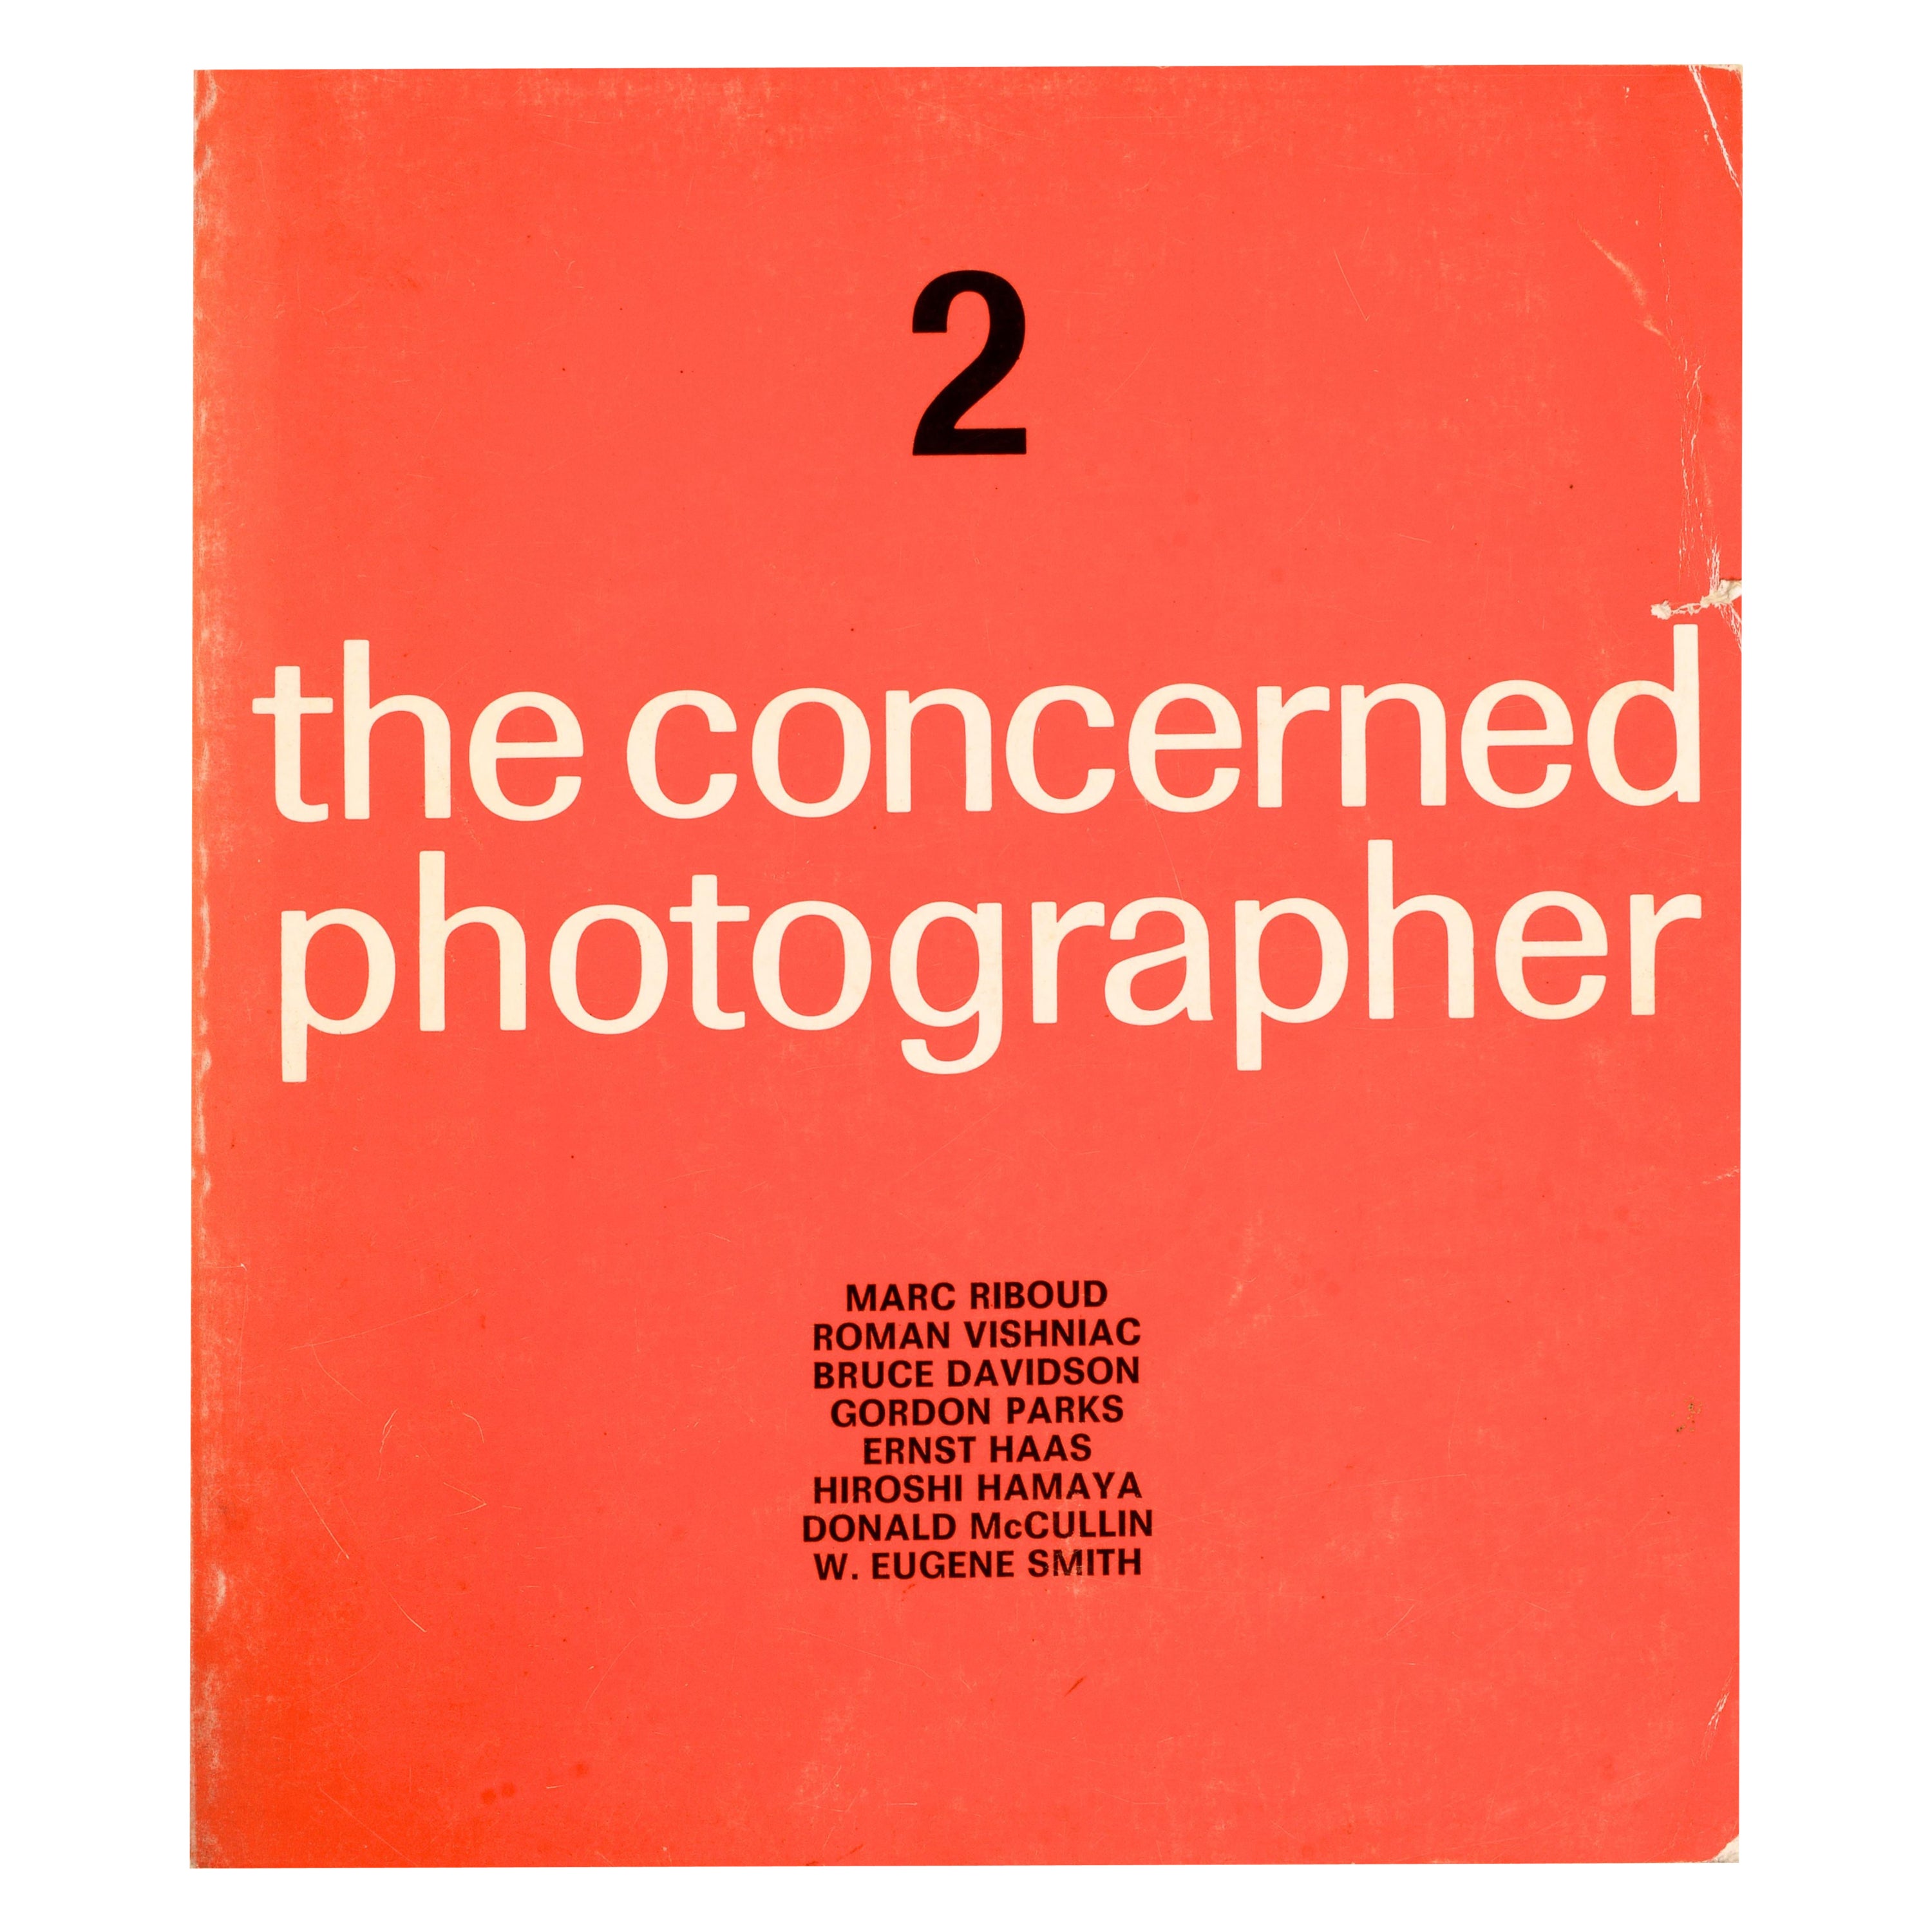 The Concerned Photographer 2, Cornell Capa, Editor, 1st Ed